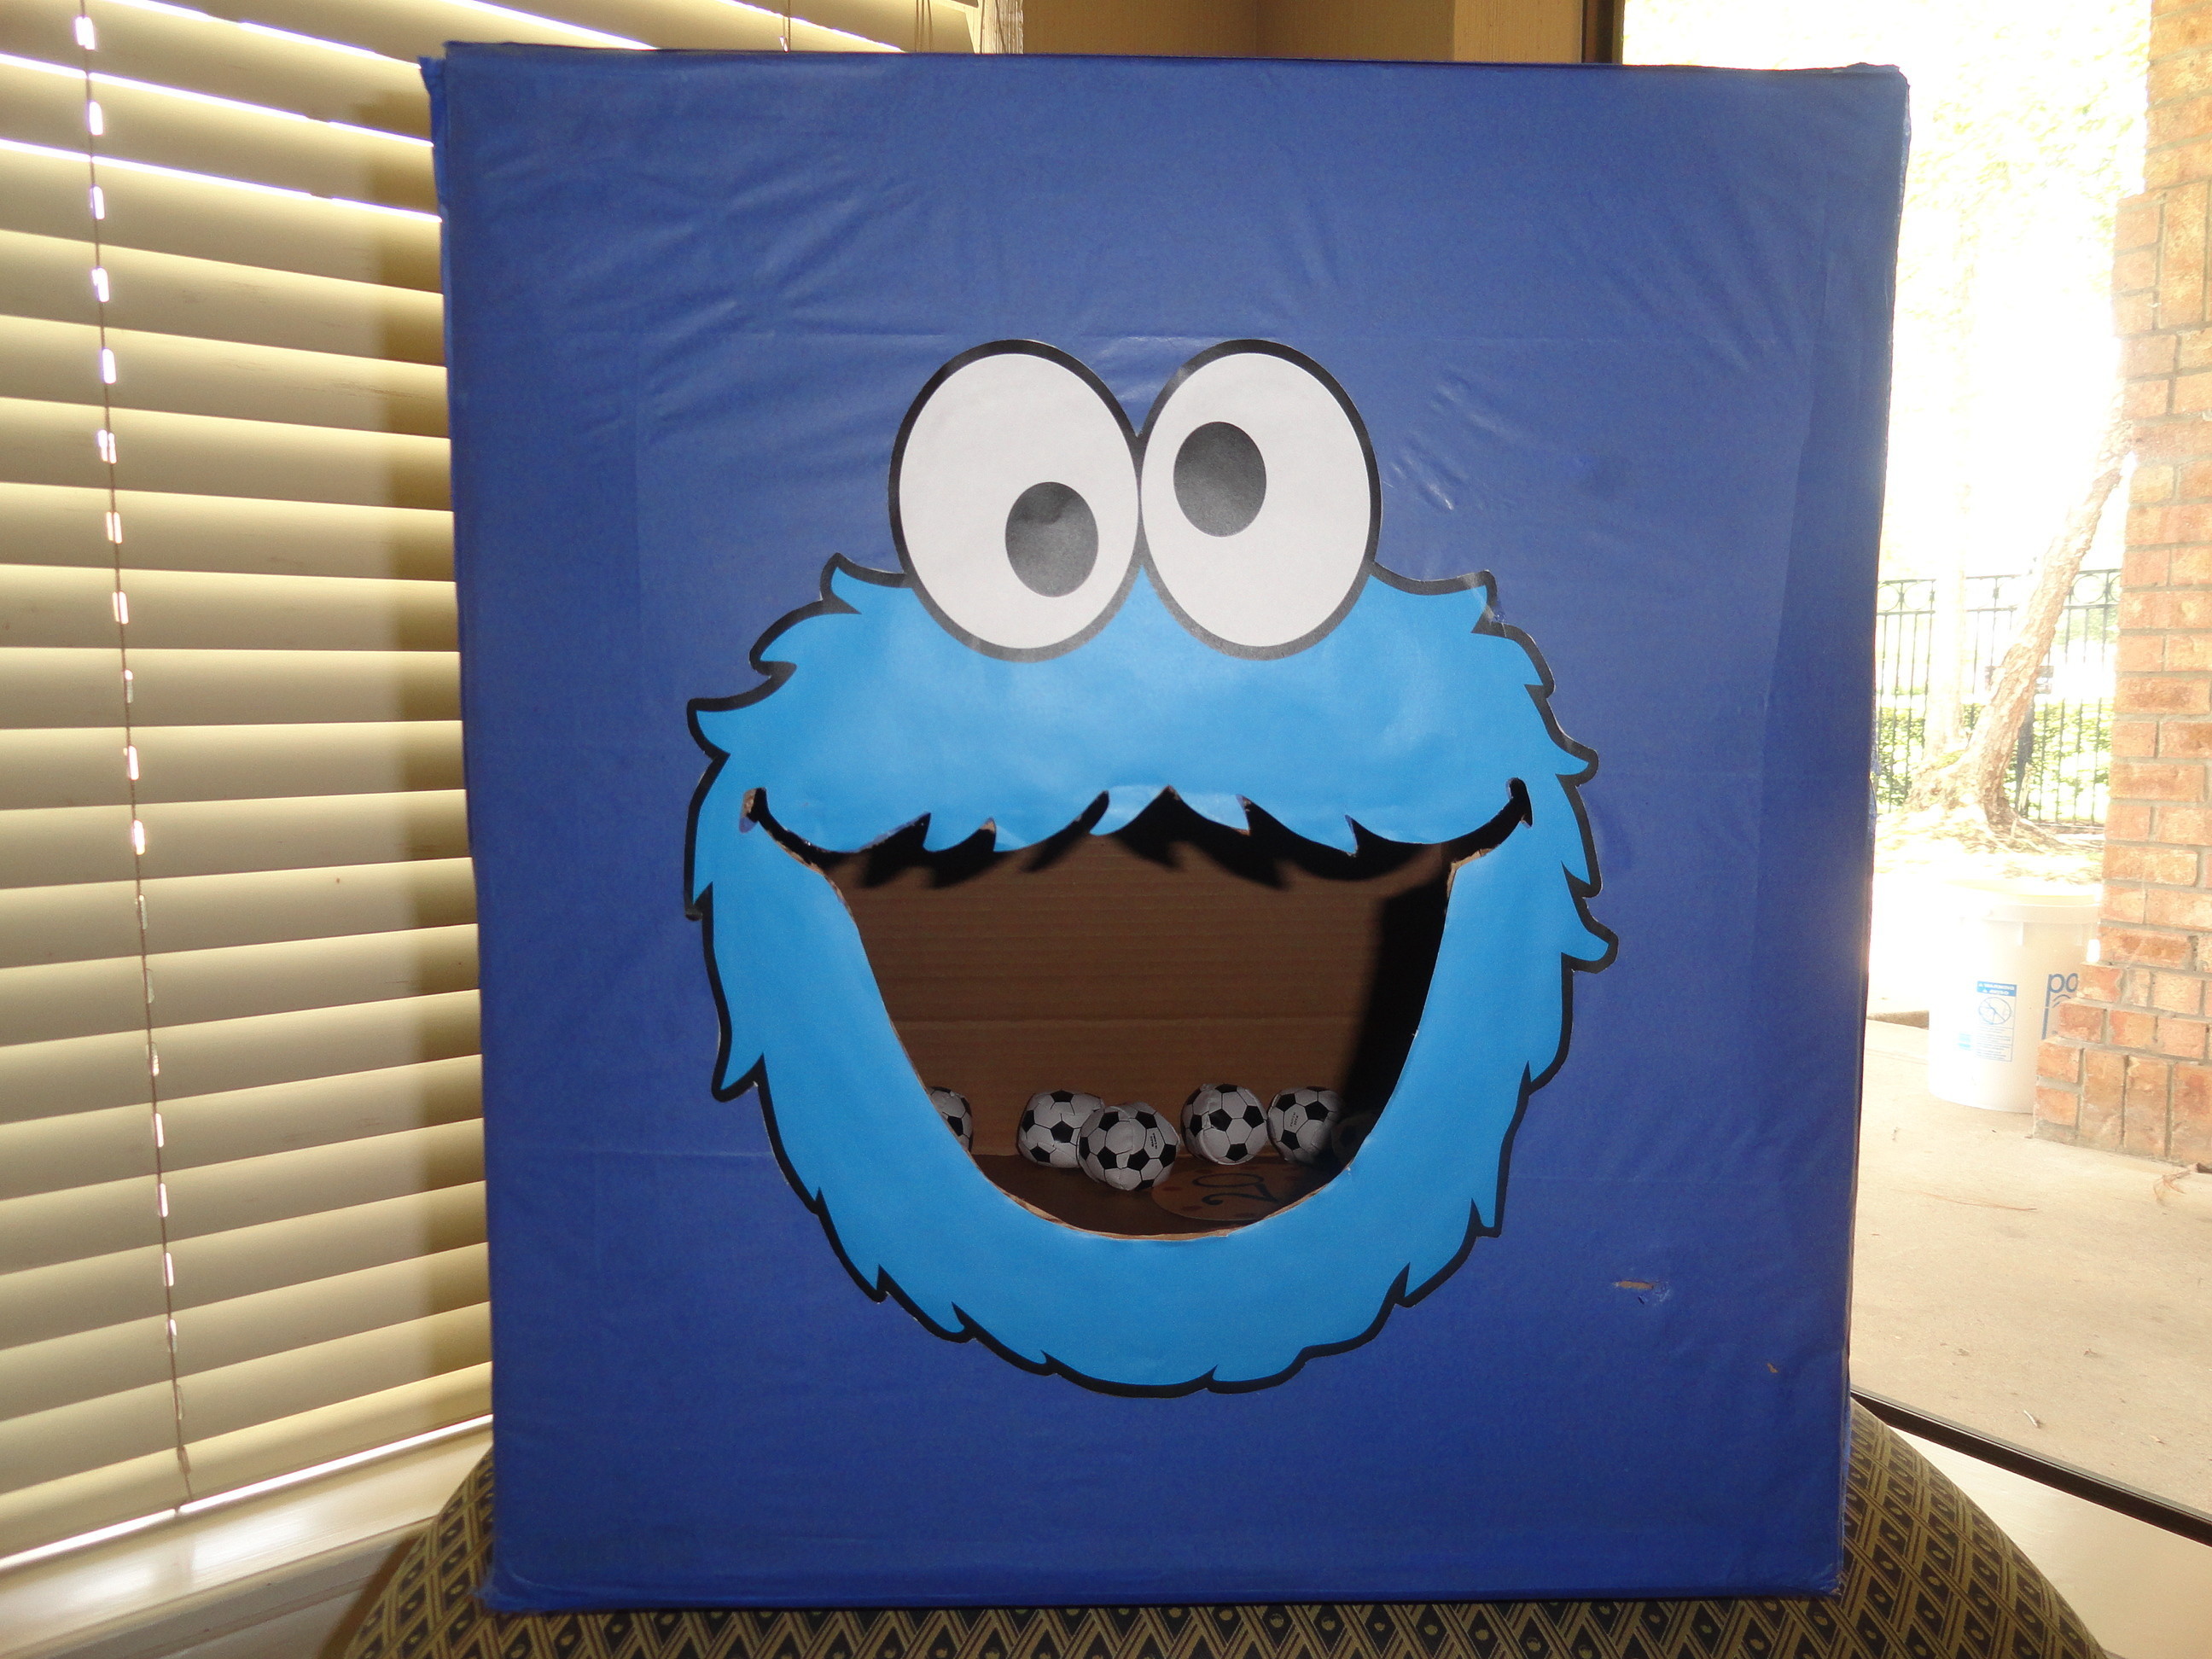 Cookie Monster First Birthday Party - Project Nursery2592 x 1944